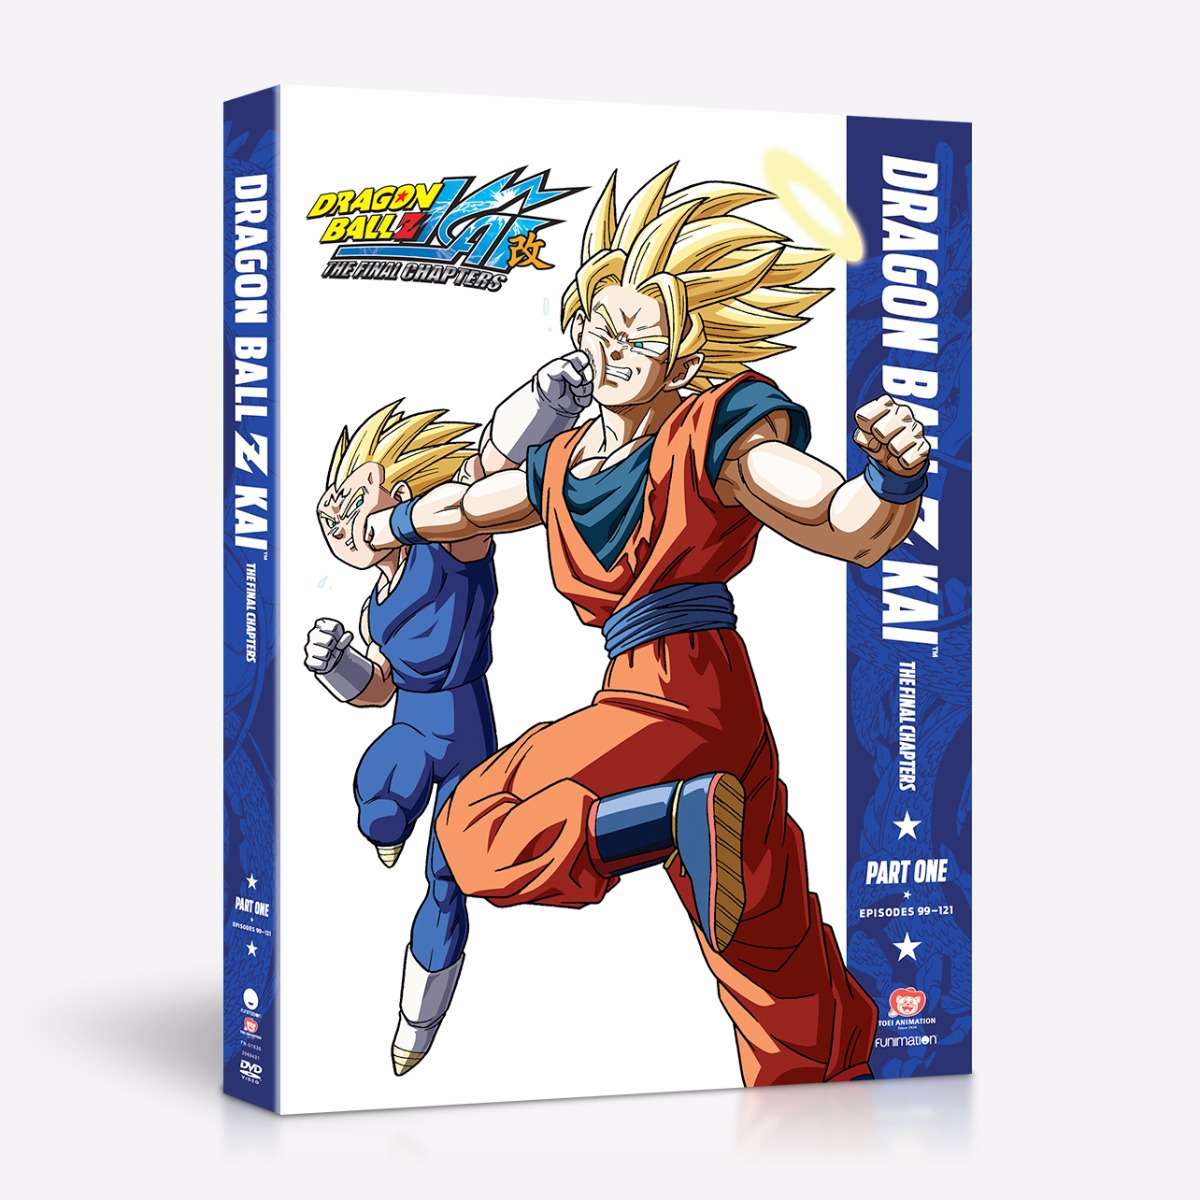 Shop Dragon Ball Z Kai The Final Chapter - Part One - DVD | Funimation